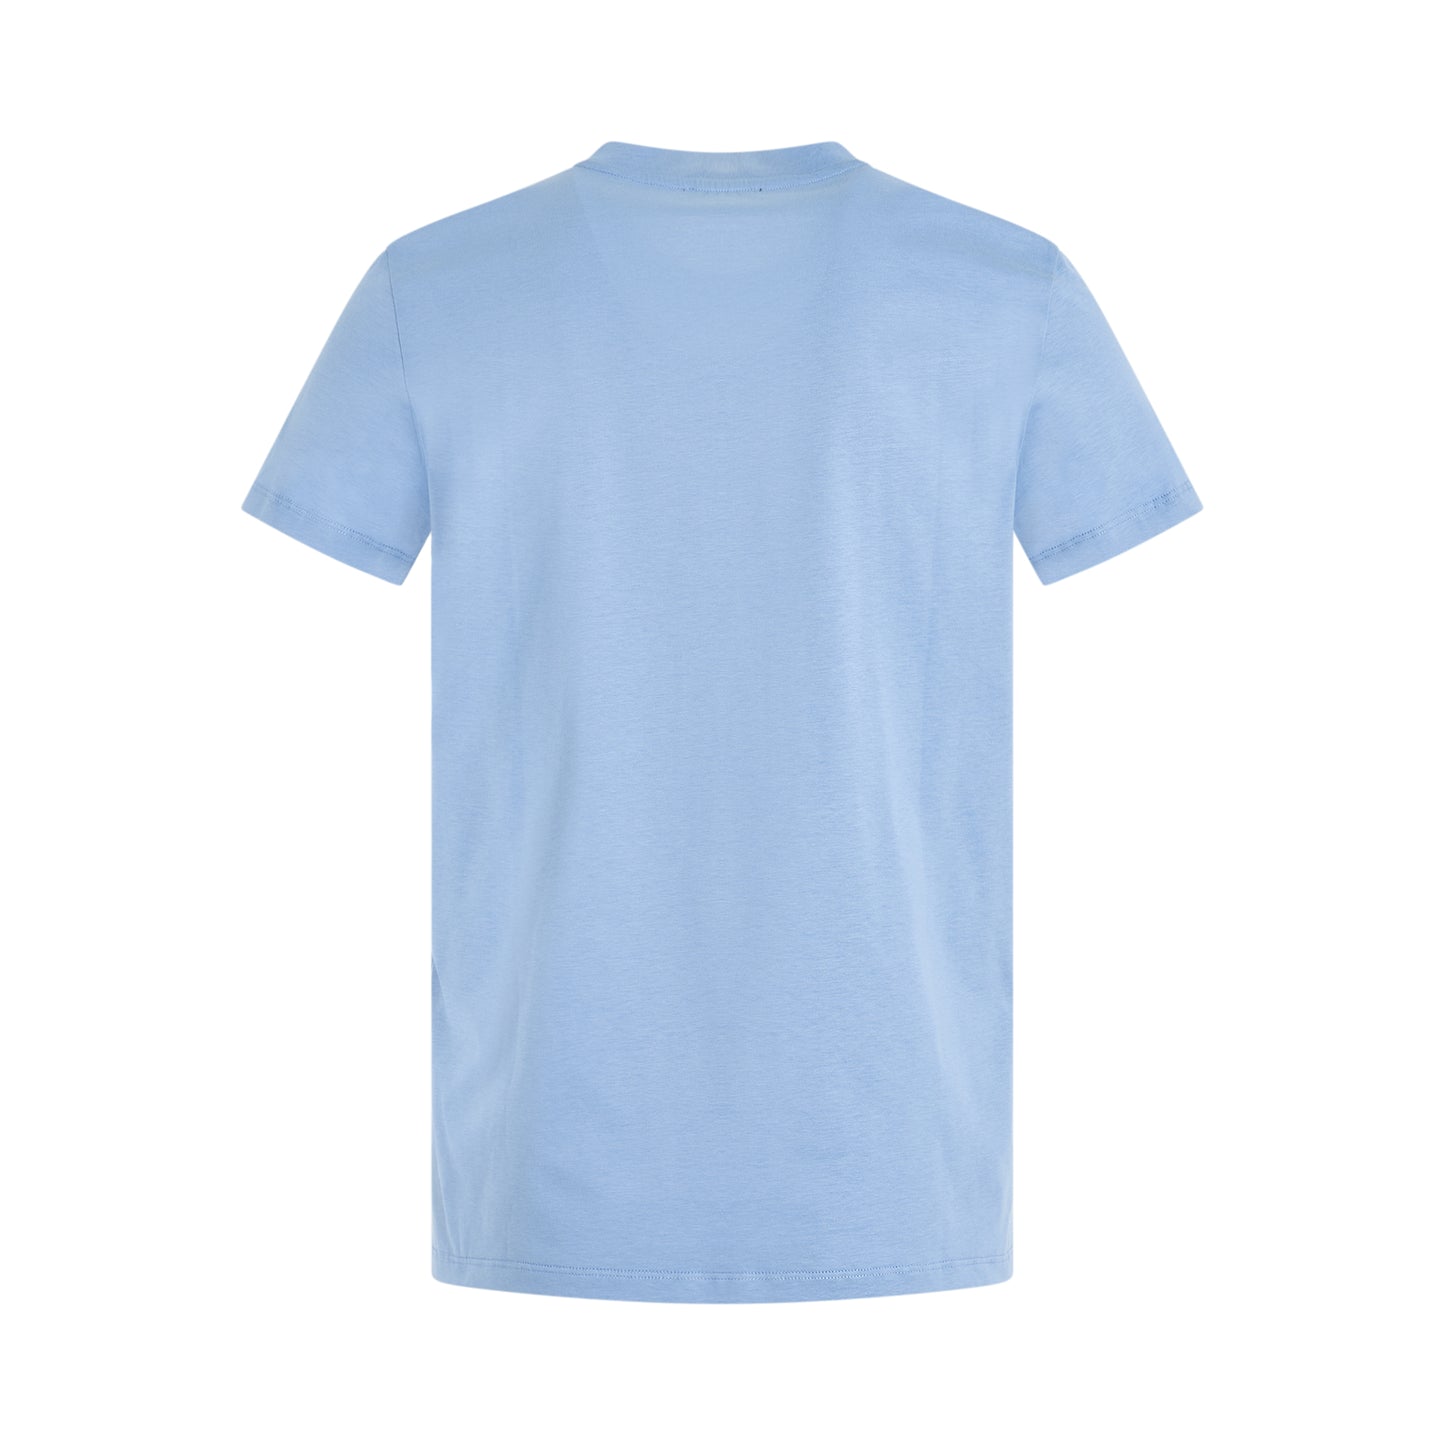 Classic Fit Flock T-Shirt in Blue/White